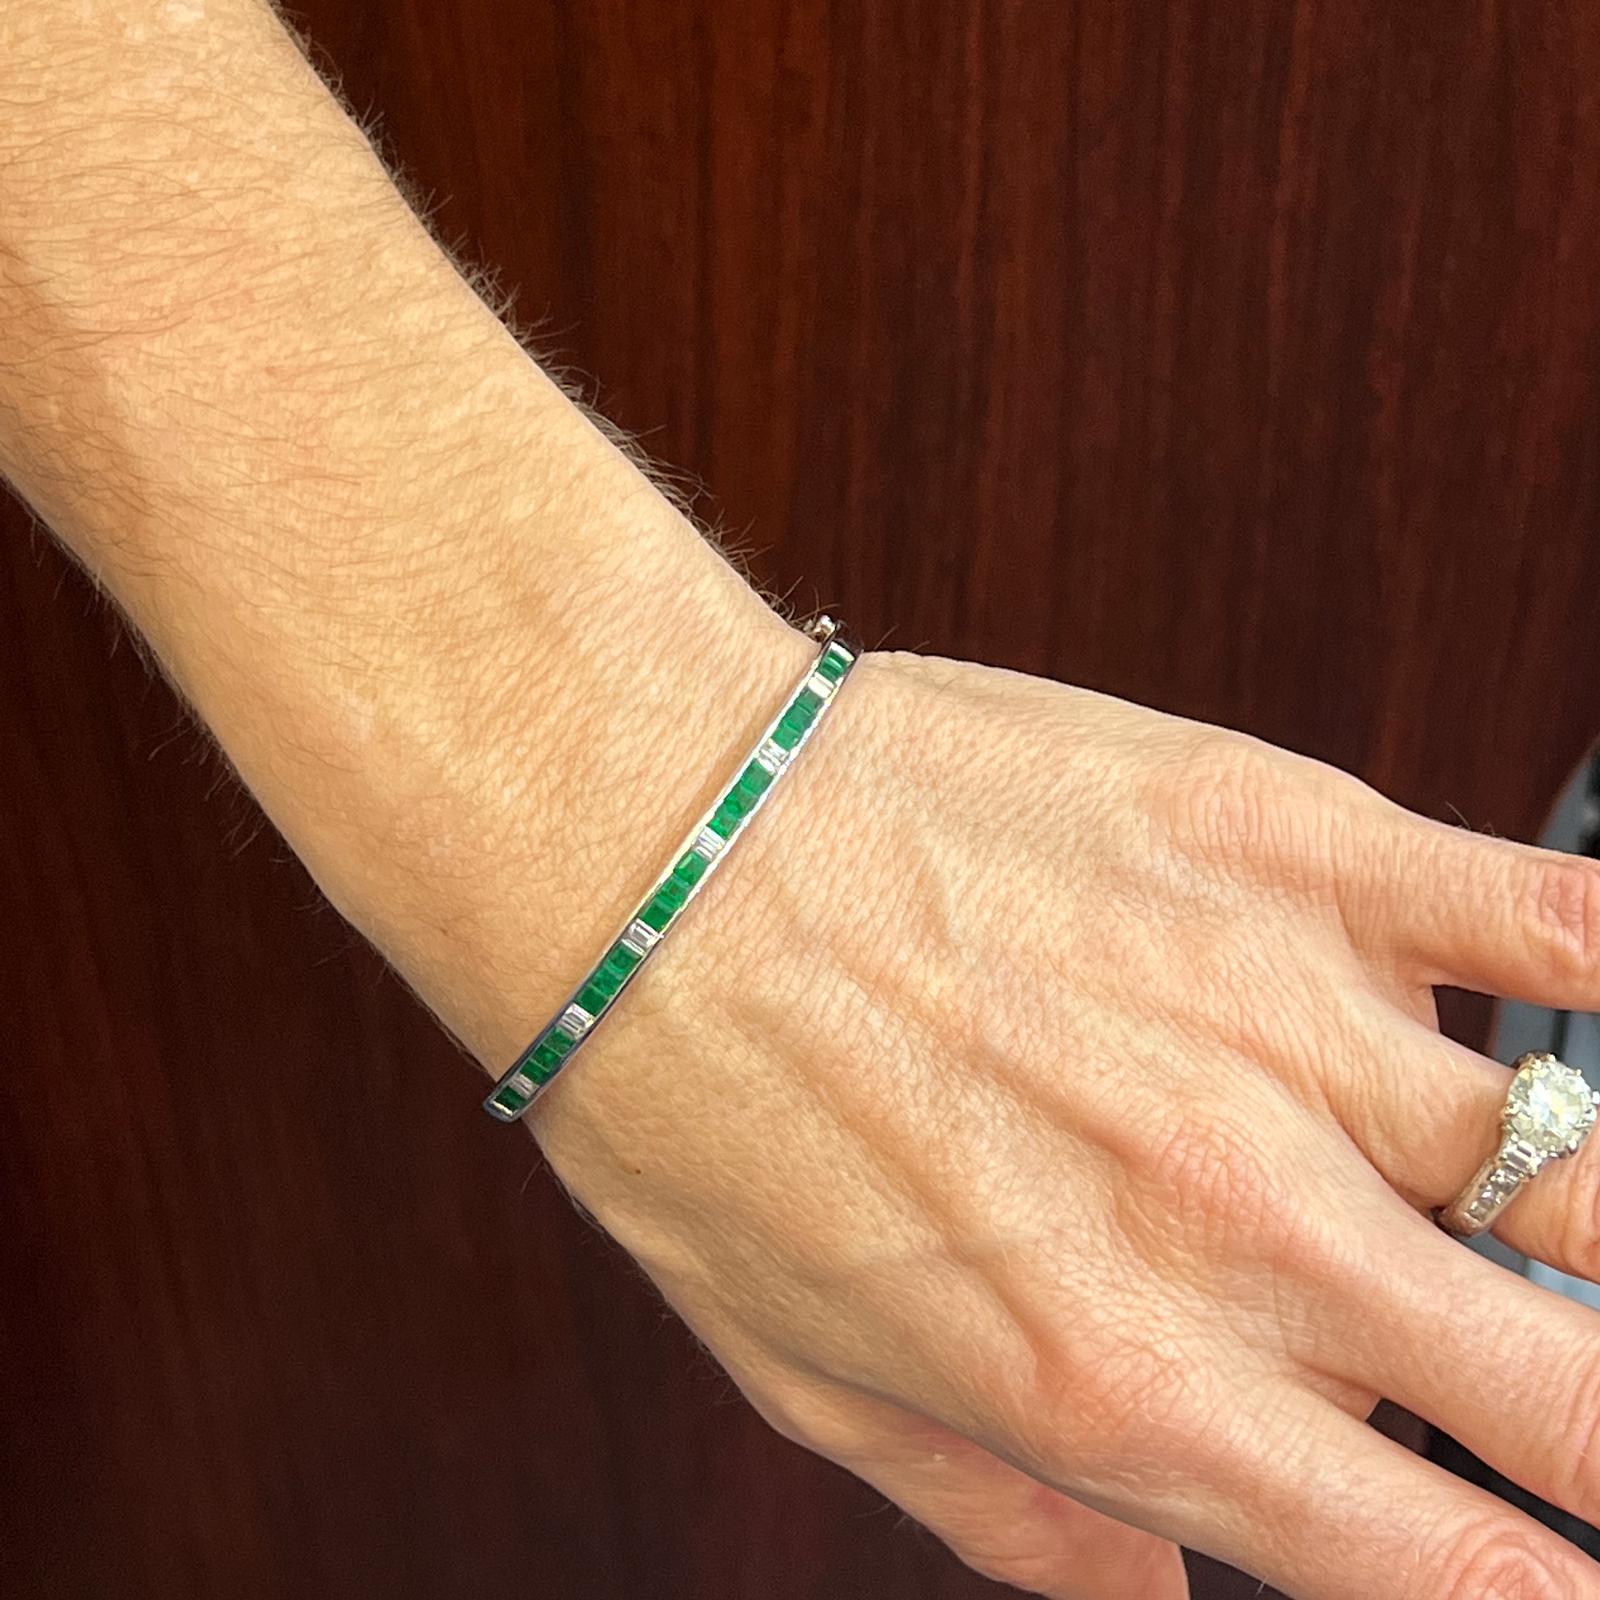 Emerald and diamond hinged bangle bracelet fashioned in 18 karat white gold. The bangle features natural square cut emerald gemstones weighing 2.08 carat total weight, and alternating with baguette cut diamonds weighing .38 carat total weight. The